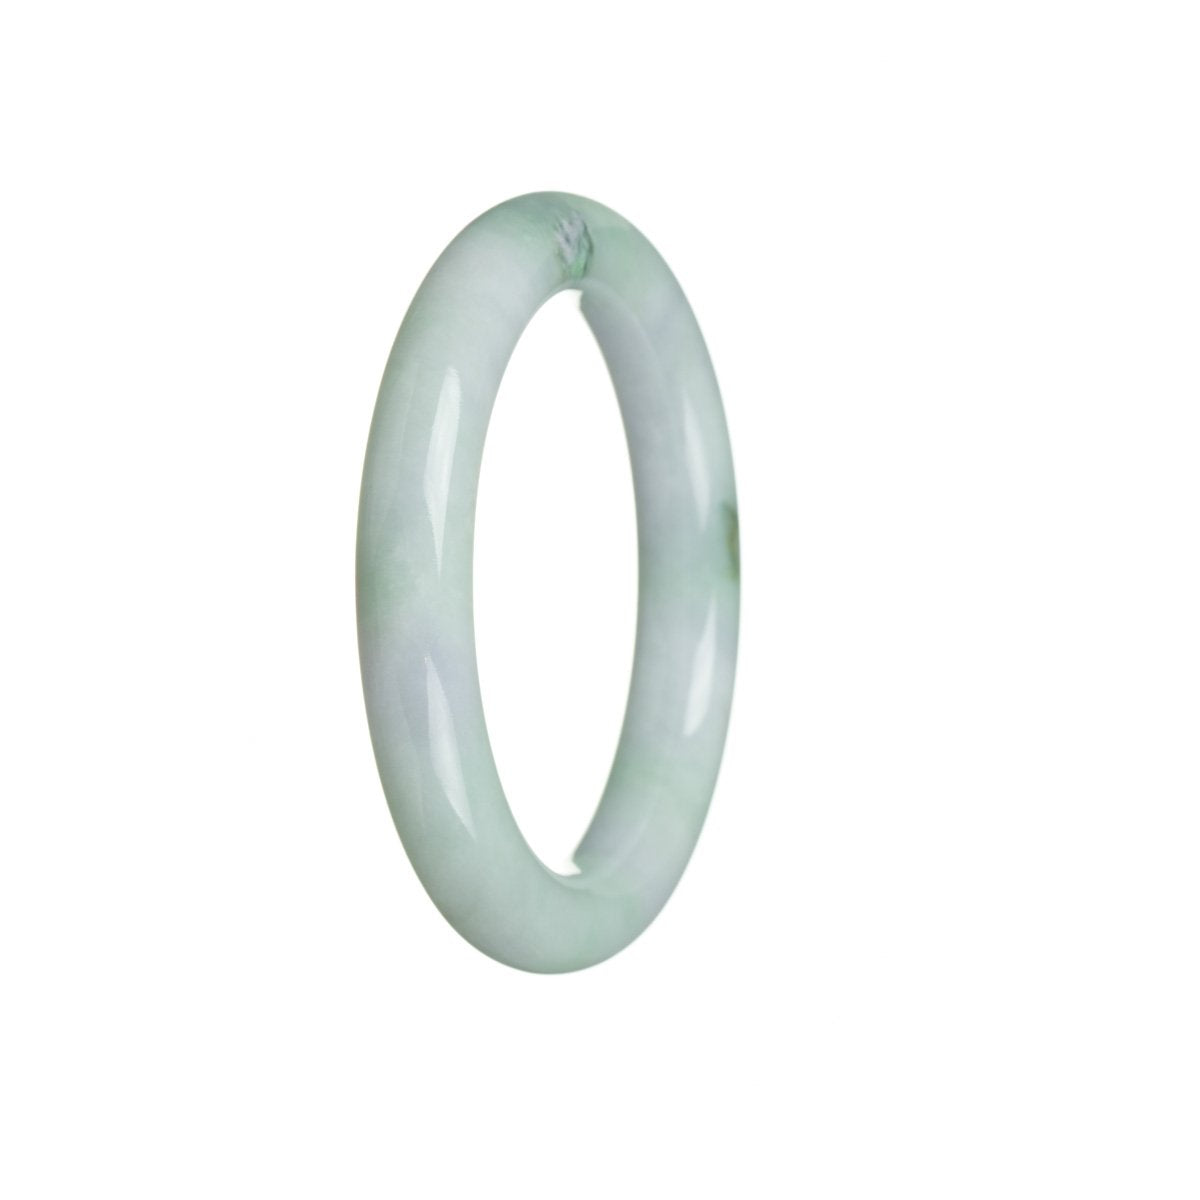 A round bangle bracelet made of genuine Grade A green jadeite with hints of lavender, measuring 51mm in diameter, from the MAYS™ collection.